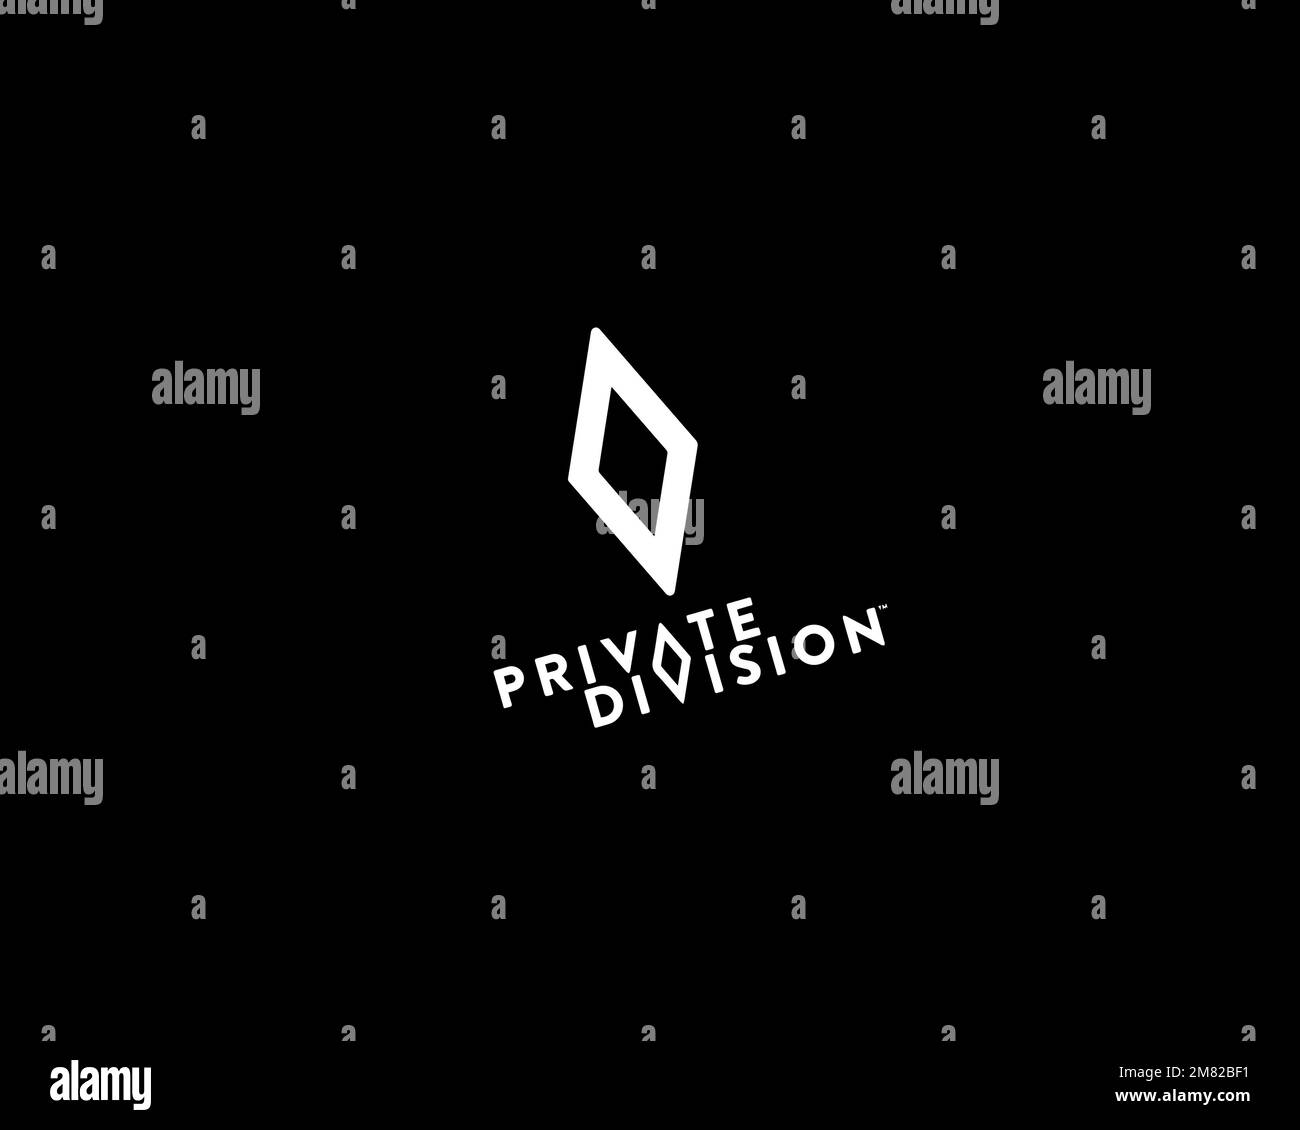 Private Division, Rotated Logo, Black Background Stock Photo